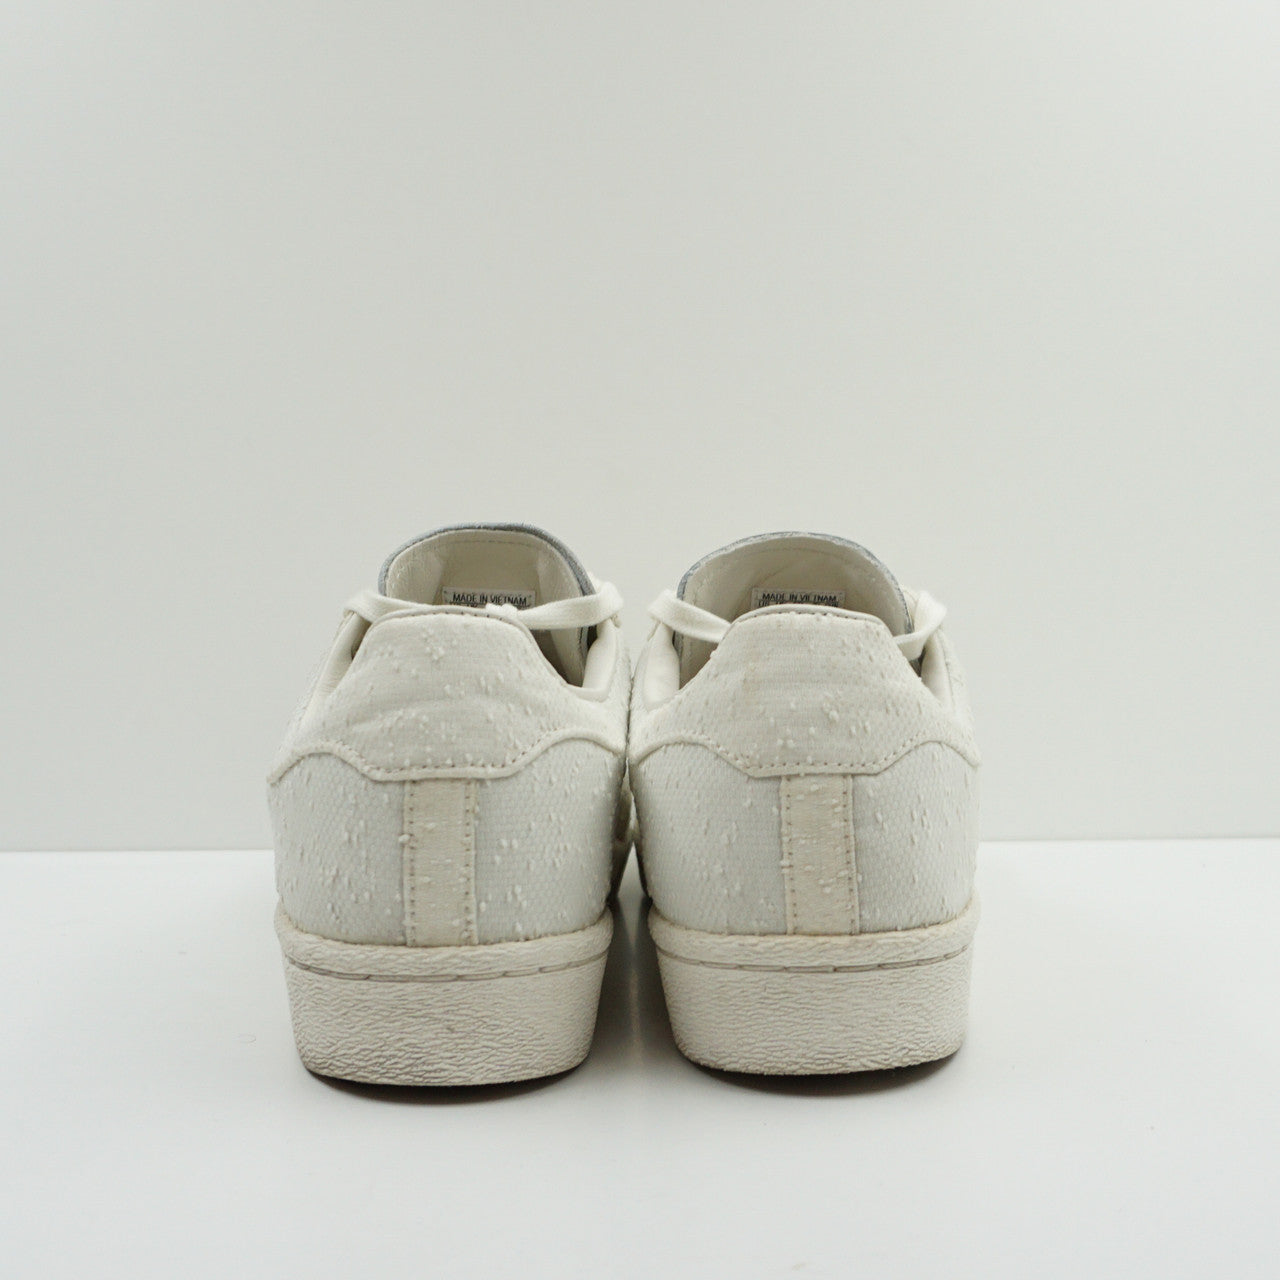 Adidas Superstar Boost SNS Shades of White V2